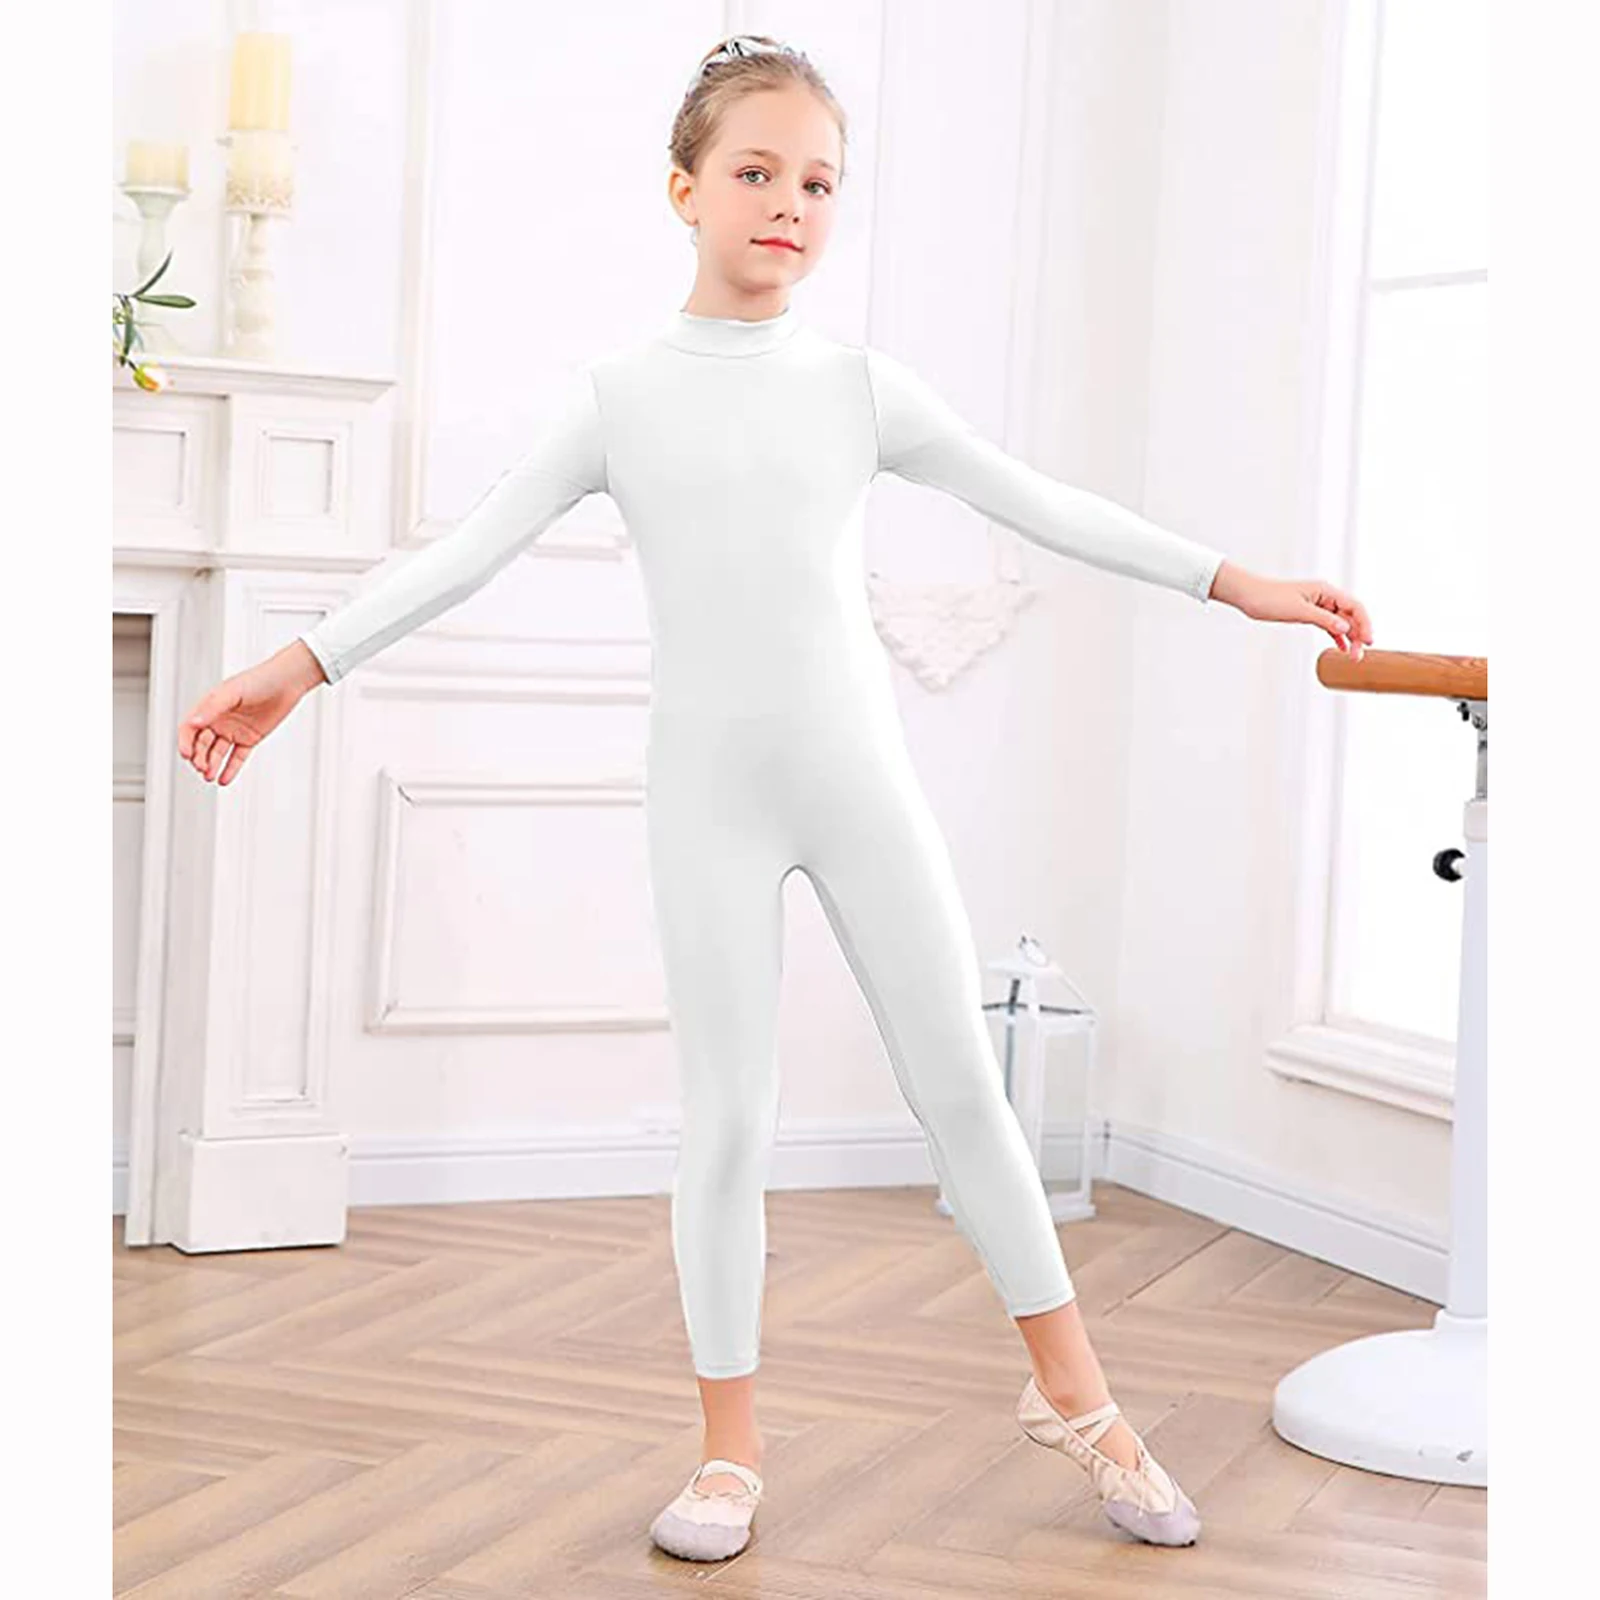 New Teen Girls Tights Ballet Dancing Leggings For Kids Footless Shiny  Spandex Trousers Elastic Workout Tight Exercise Yoga Pants - Ballet -  AliExpress